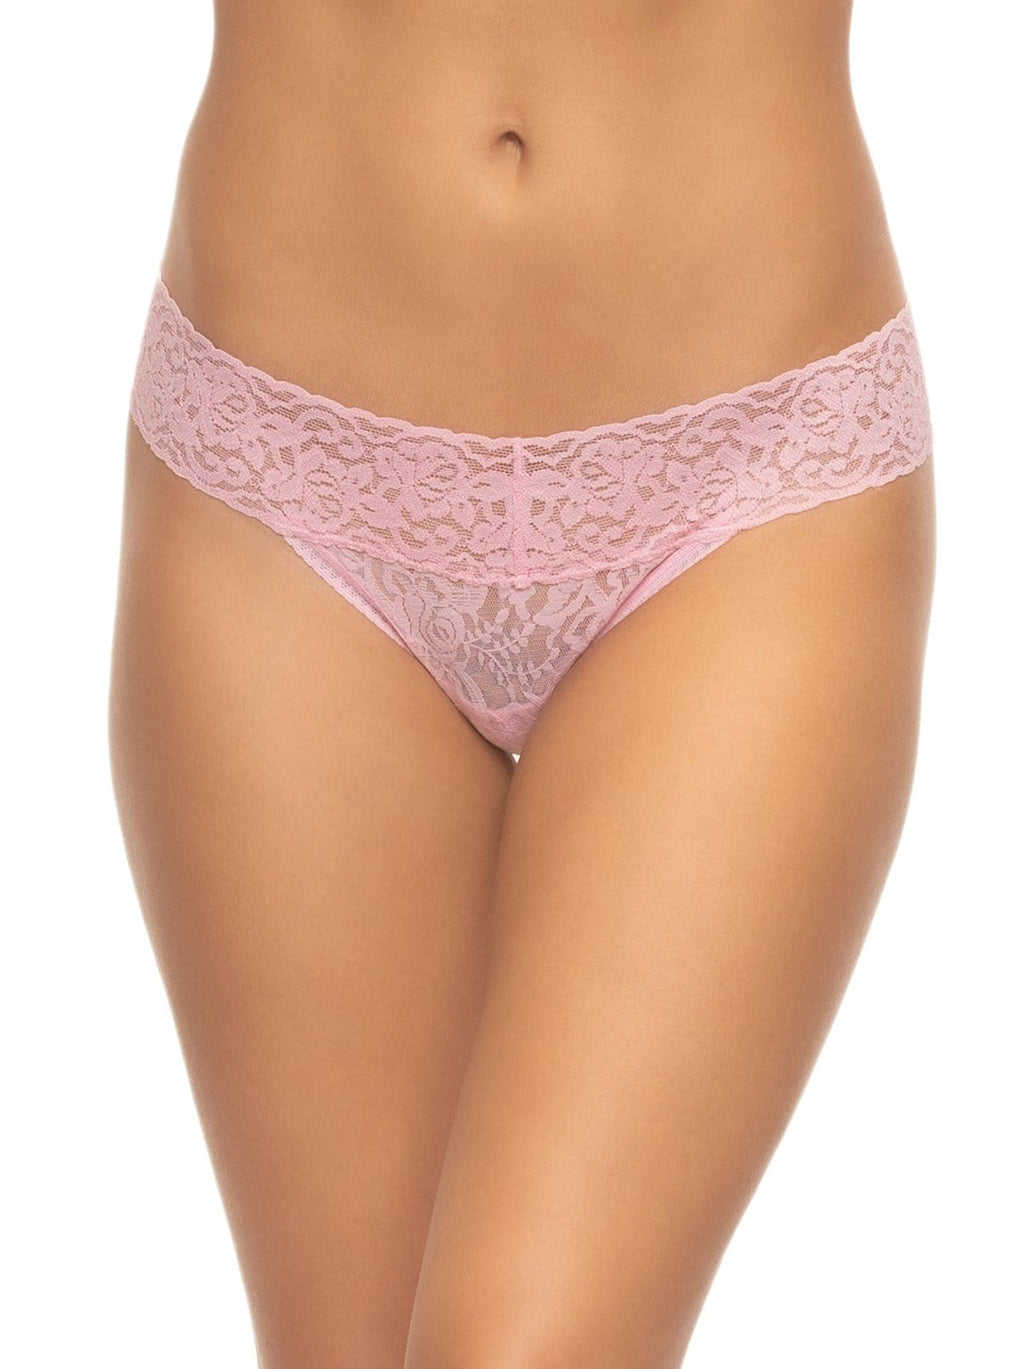 New Design Polyester & Spandex Half Coverage Lace Comfortable Brief  Underwear|| Lingerie Women Low Rise T-string Thong Panties || Sexy Cheeky  Lace